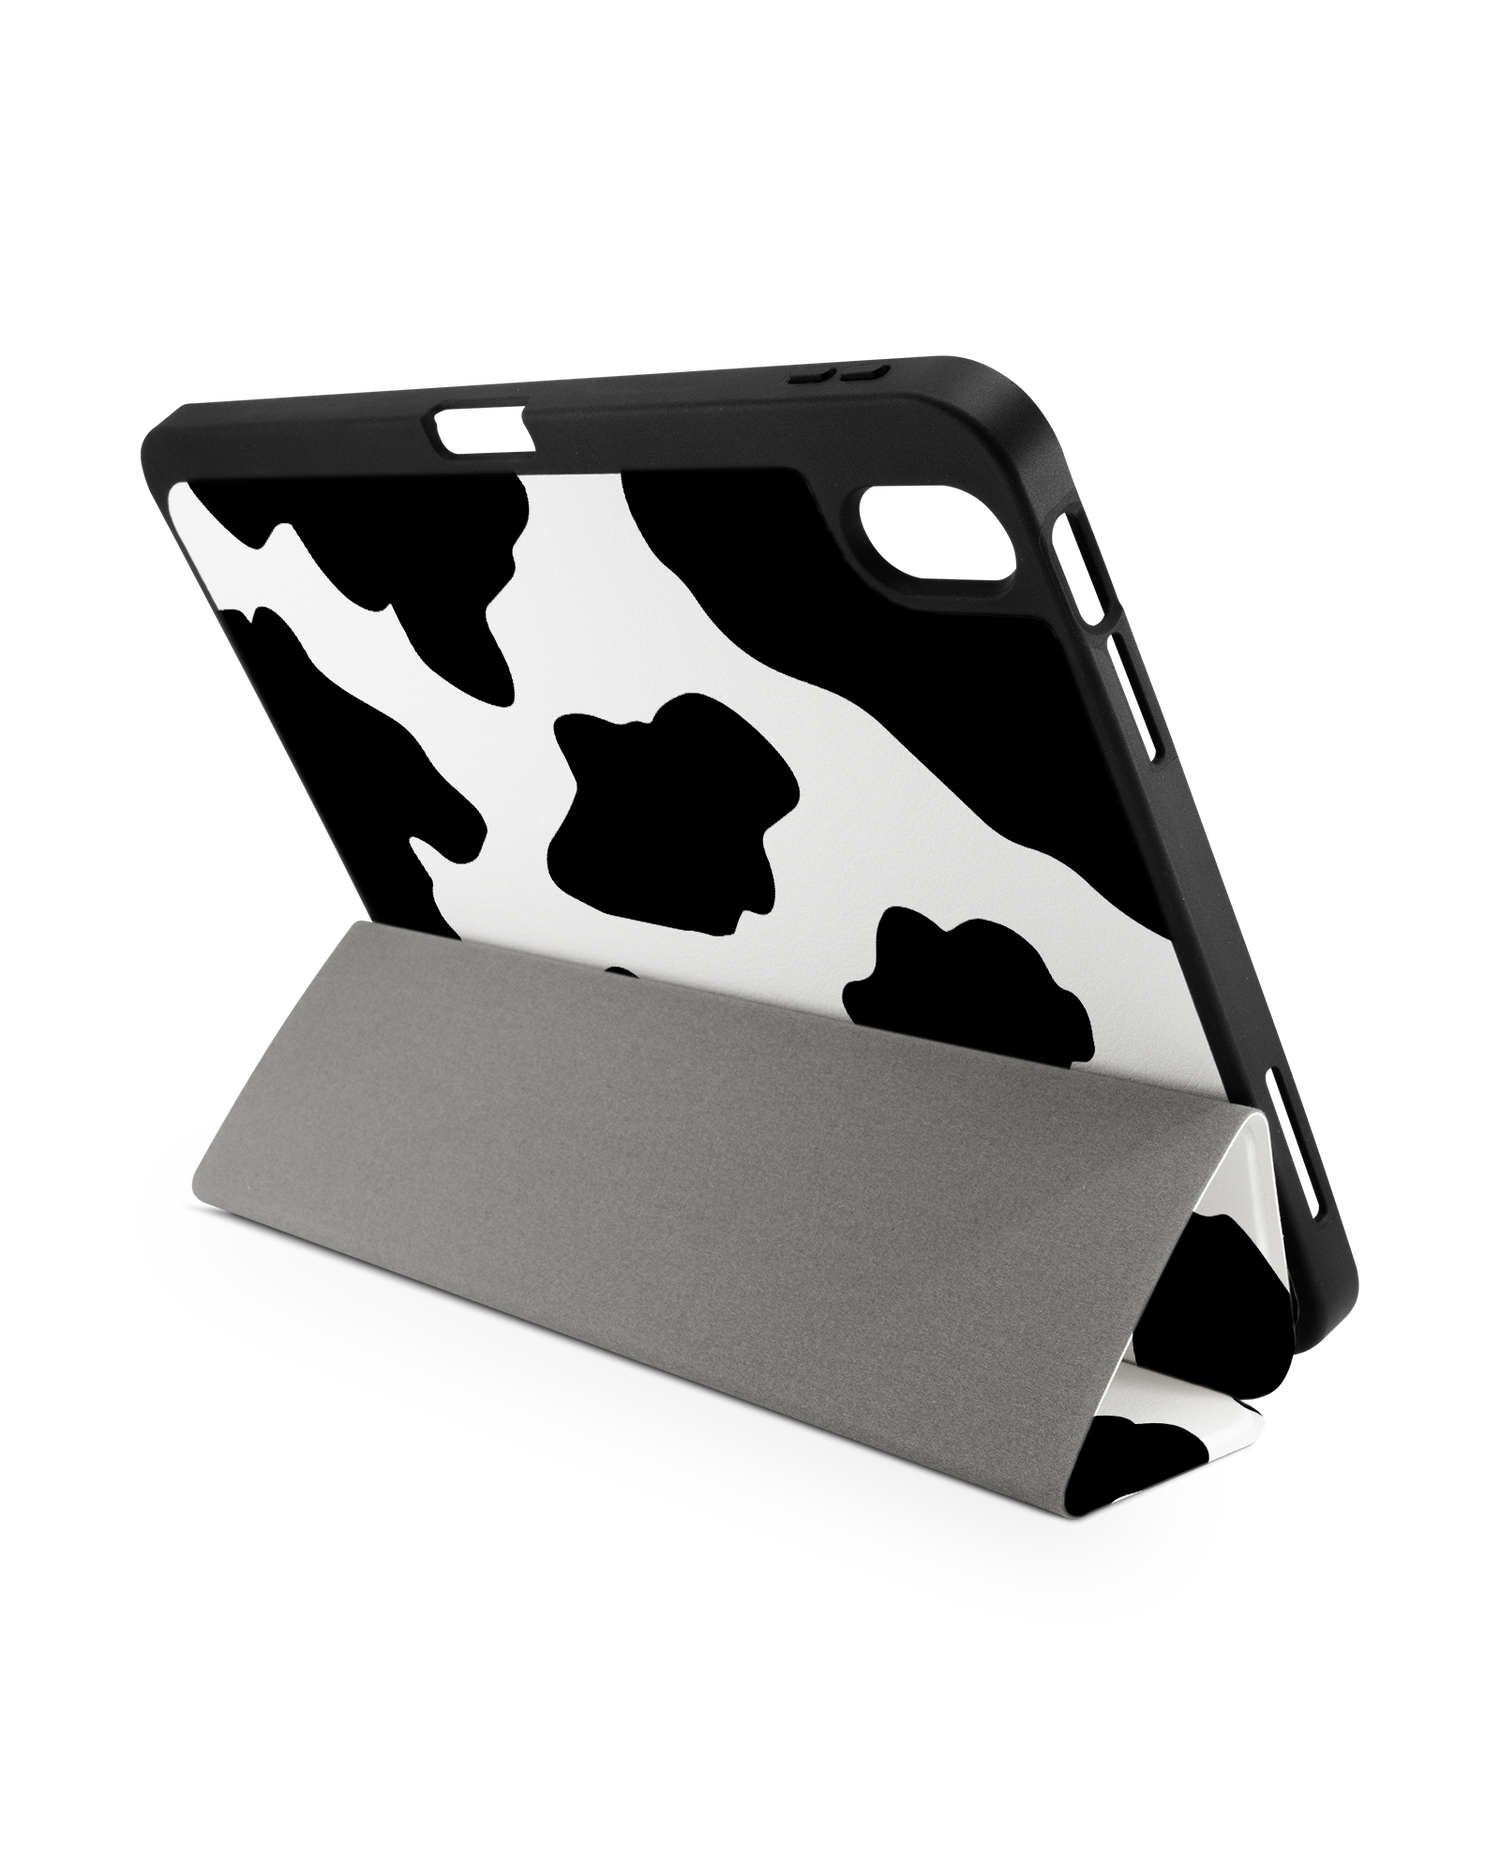 Cow Print 2 iPad Case with Pencil Holder for Apple iPad (10th Generation): Set up in landscape format (back view)